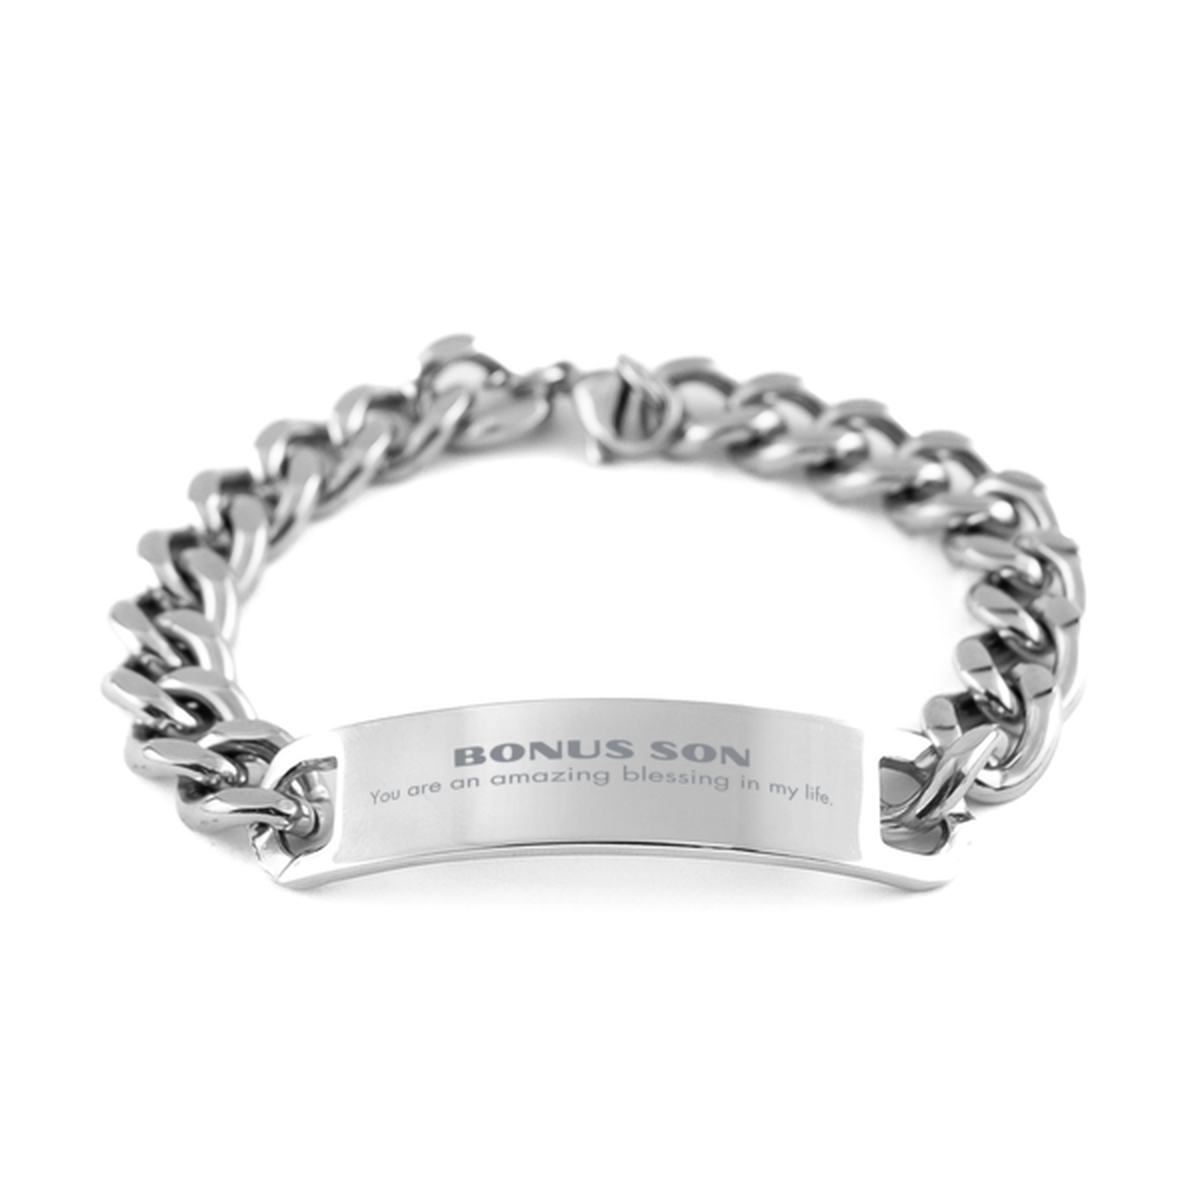 Bonus Son Cuban Chain Stainless Steel Bracelet, You are an amazing blessing in my life, Thank You Gifts For Bonus Son, Inspirational Birthday Christmas Unique Gifts For Bonus Son